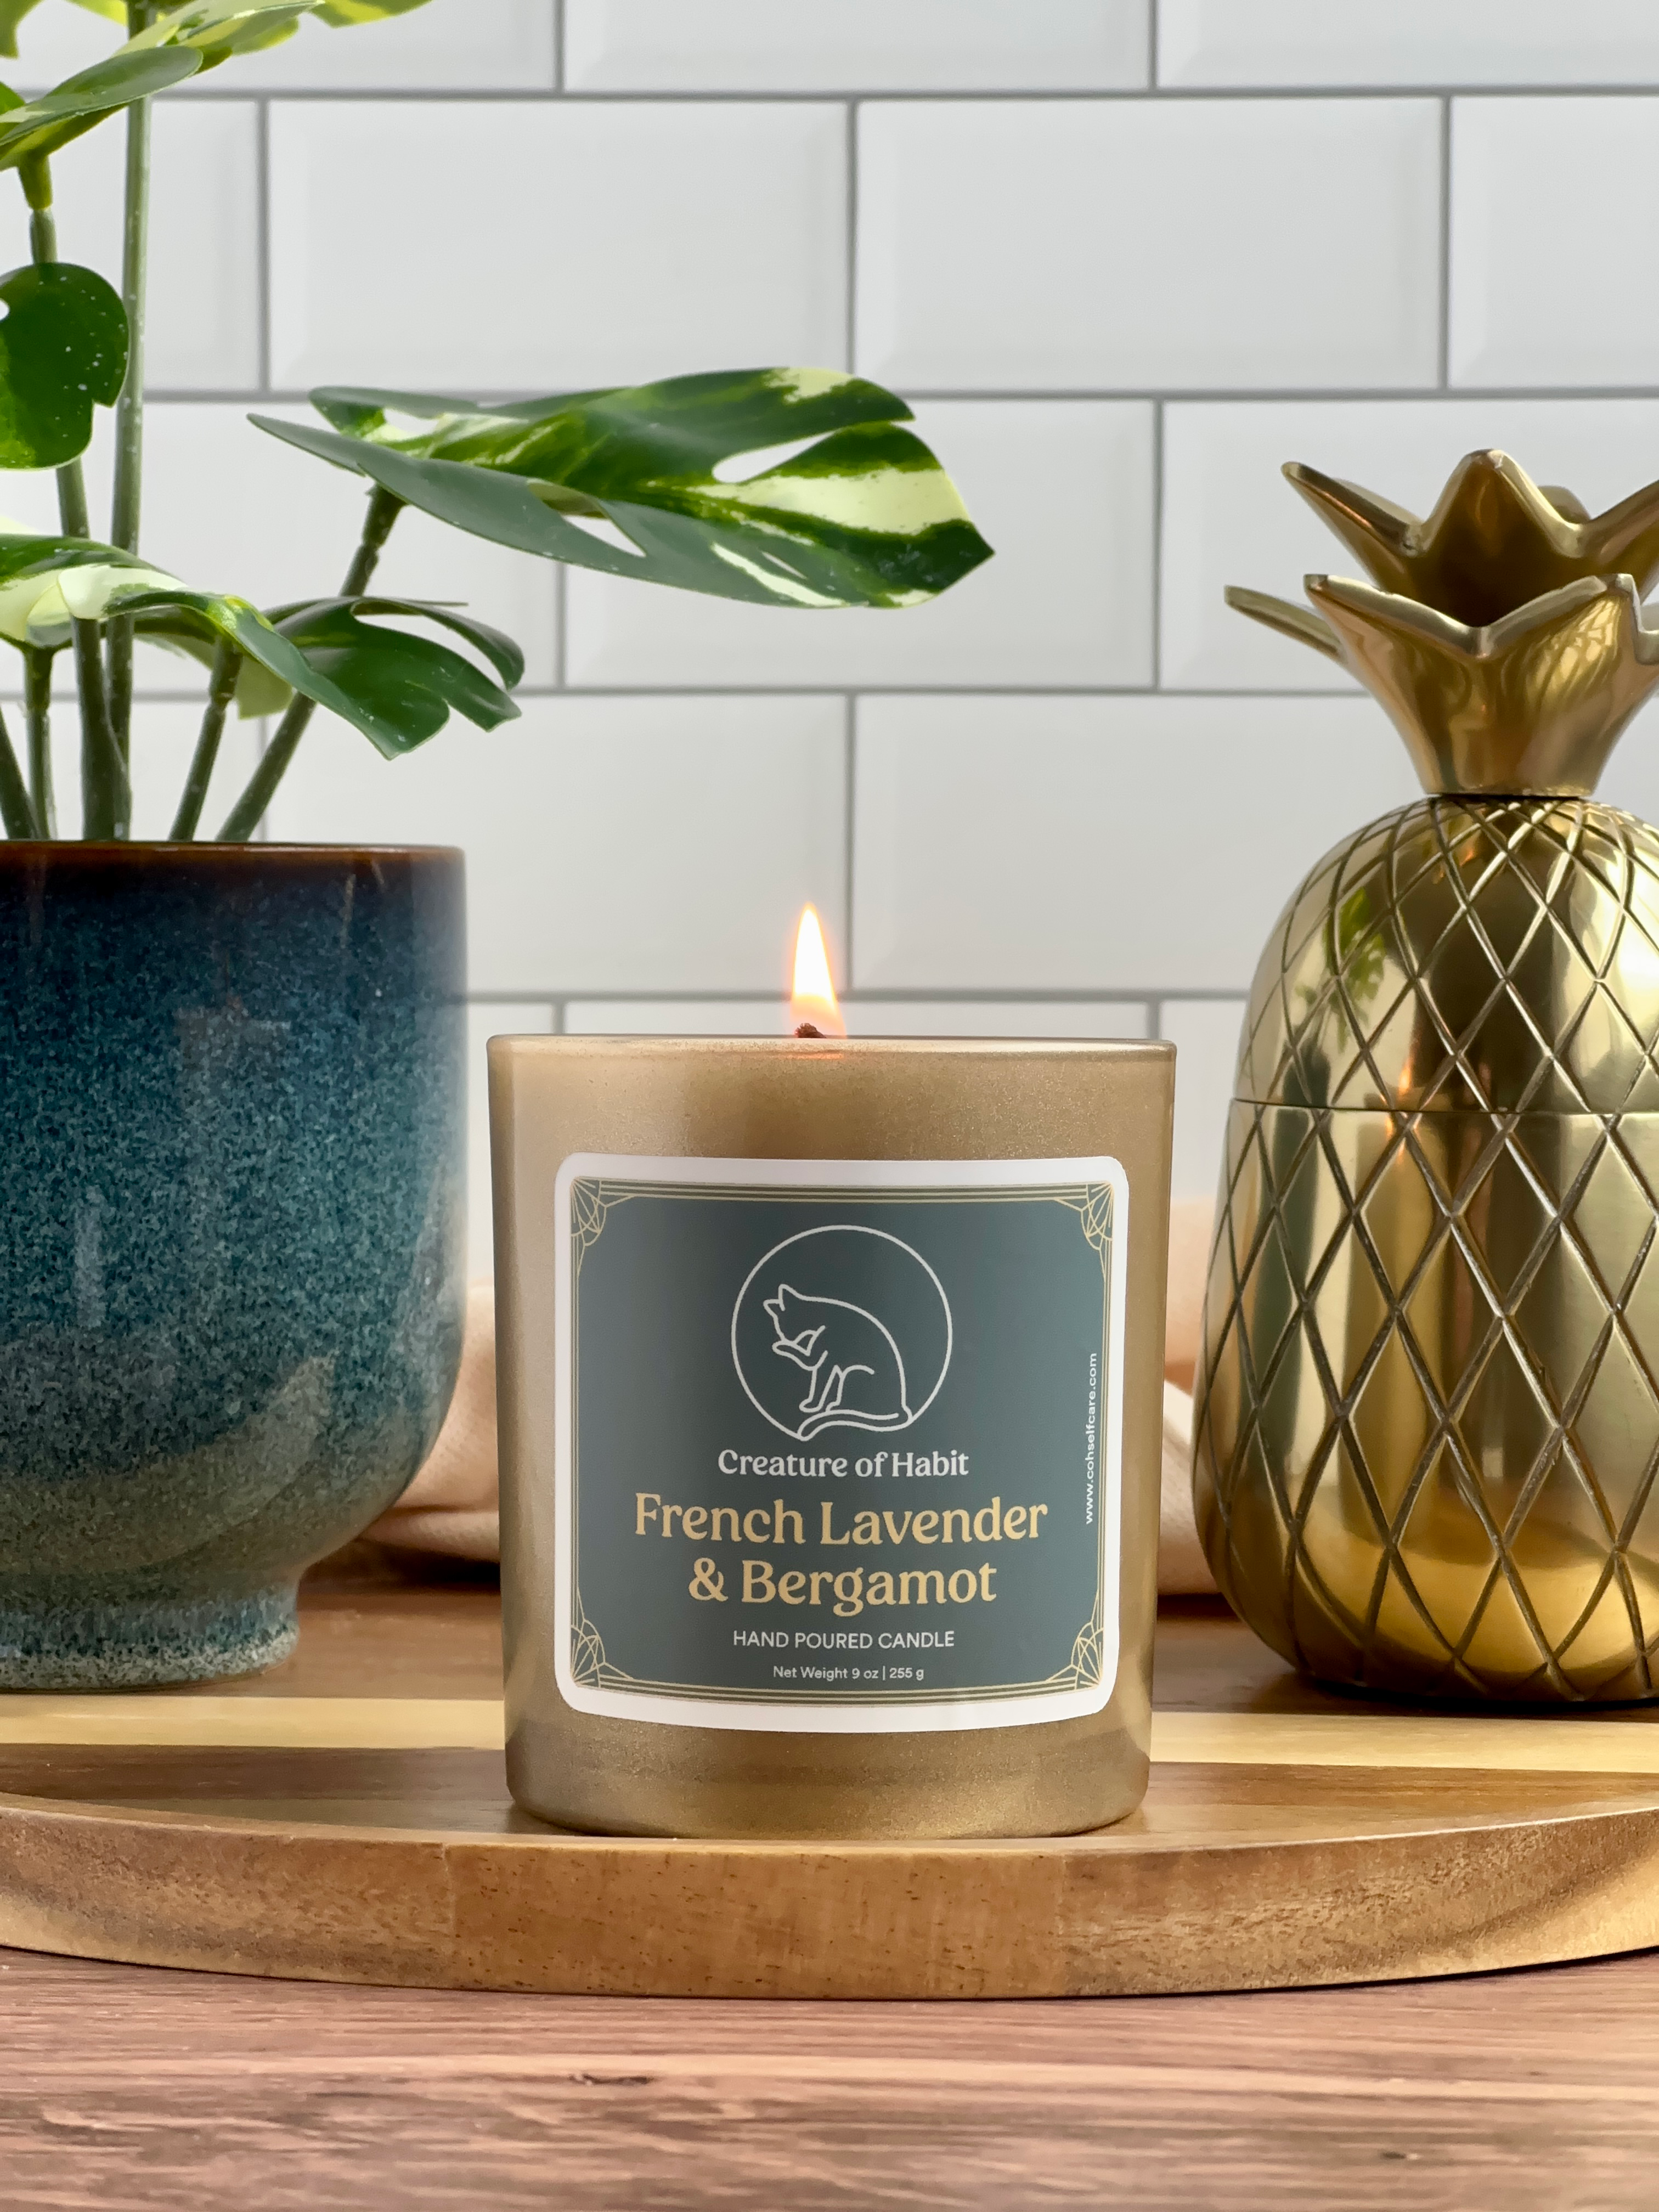 A lit soy candle within a golden vessel is placed on top of a wooden tray, next to a small houseplant and golden pineapple paperweight. The label is greyish cyan featuring the logo of a white cat silhouette, the name of the company Creature of Habit, and the scent name  French Lavender &amp; Bergamot.